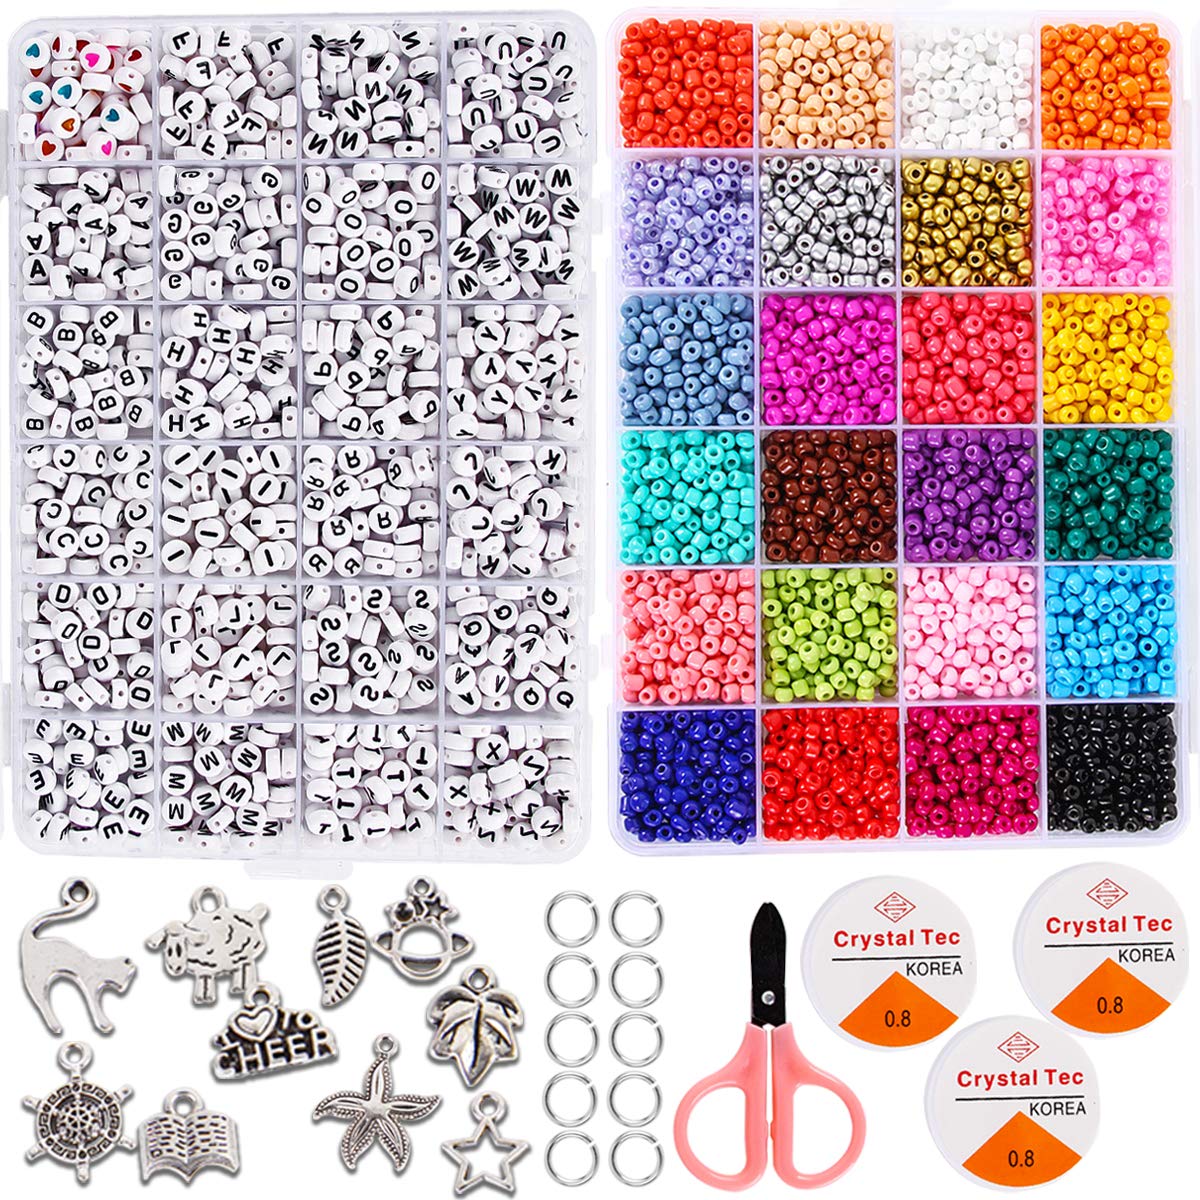 Wholesale 28 letter beads are used to make name bracelets and necklaces  Manufacturer and Supplier | Qiaoqiao